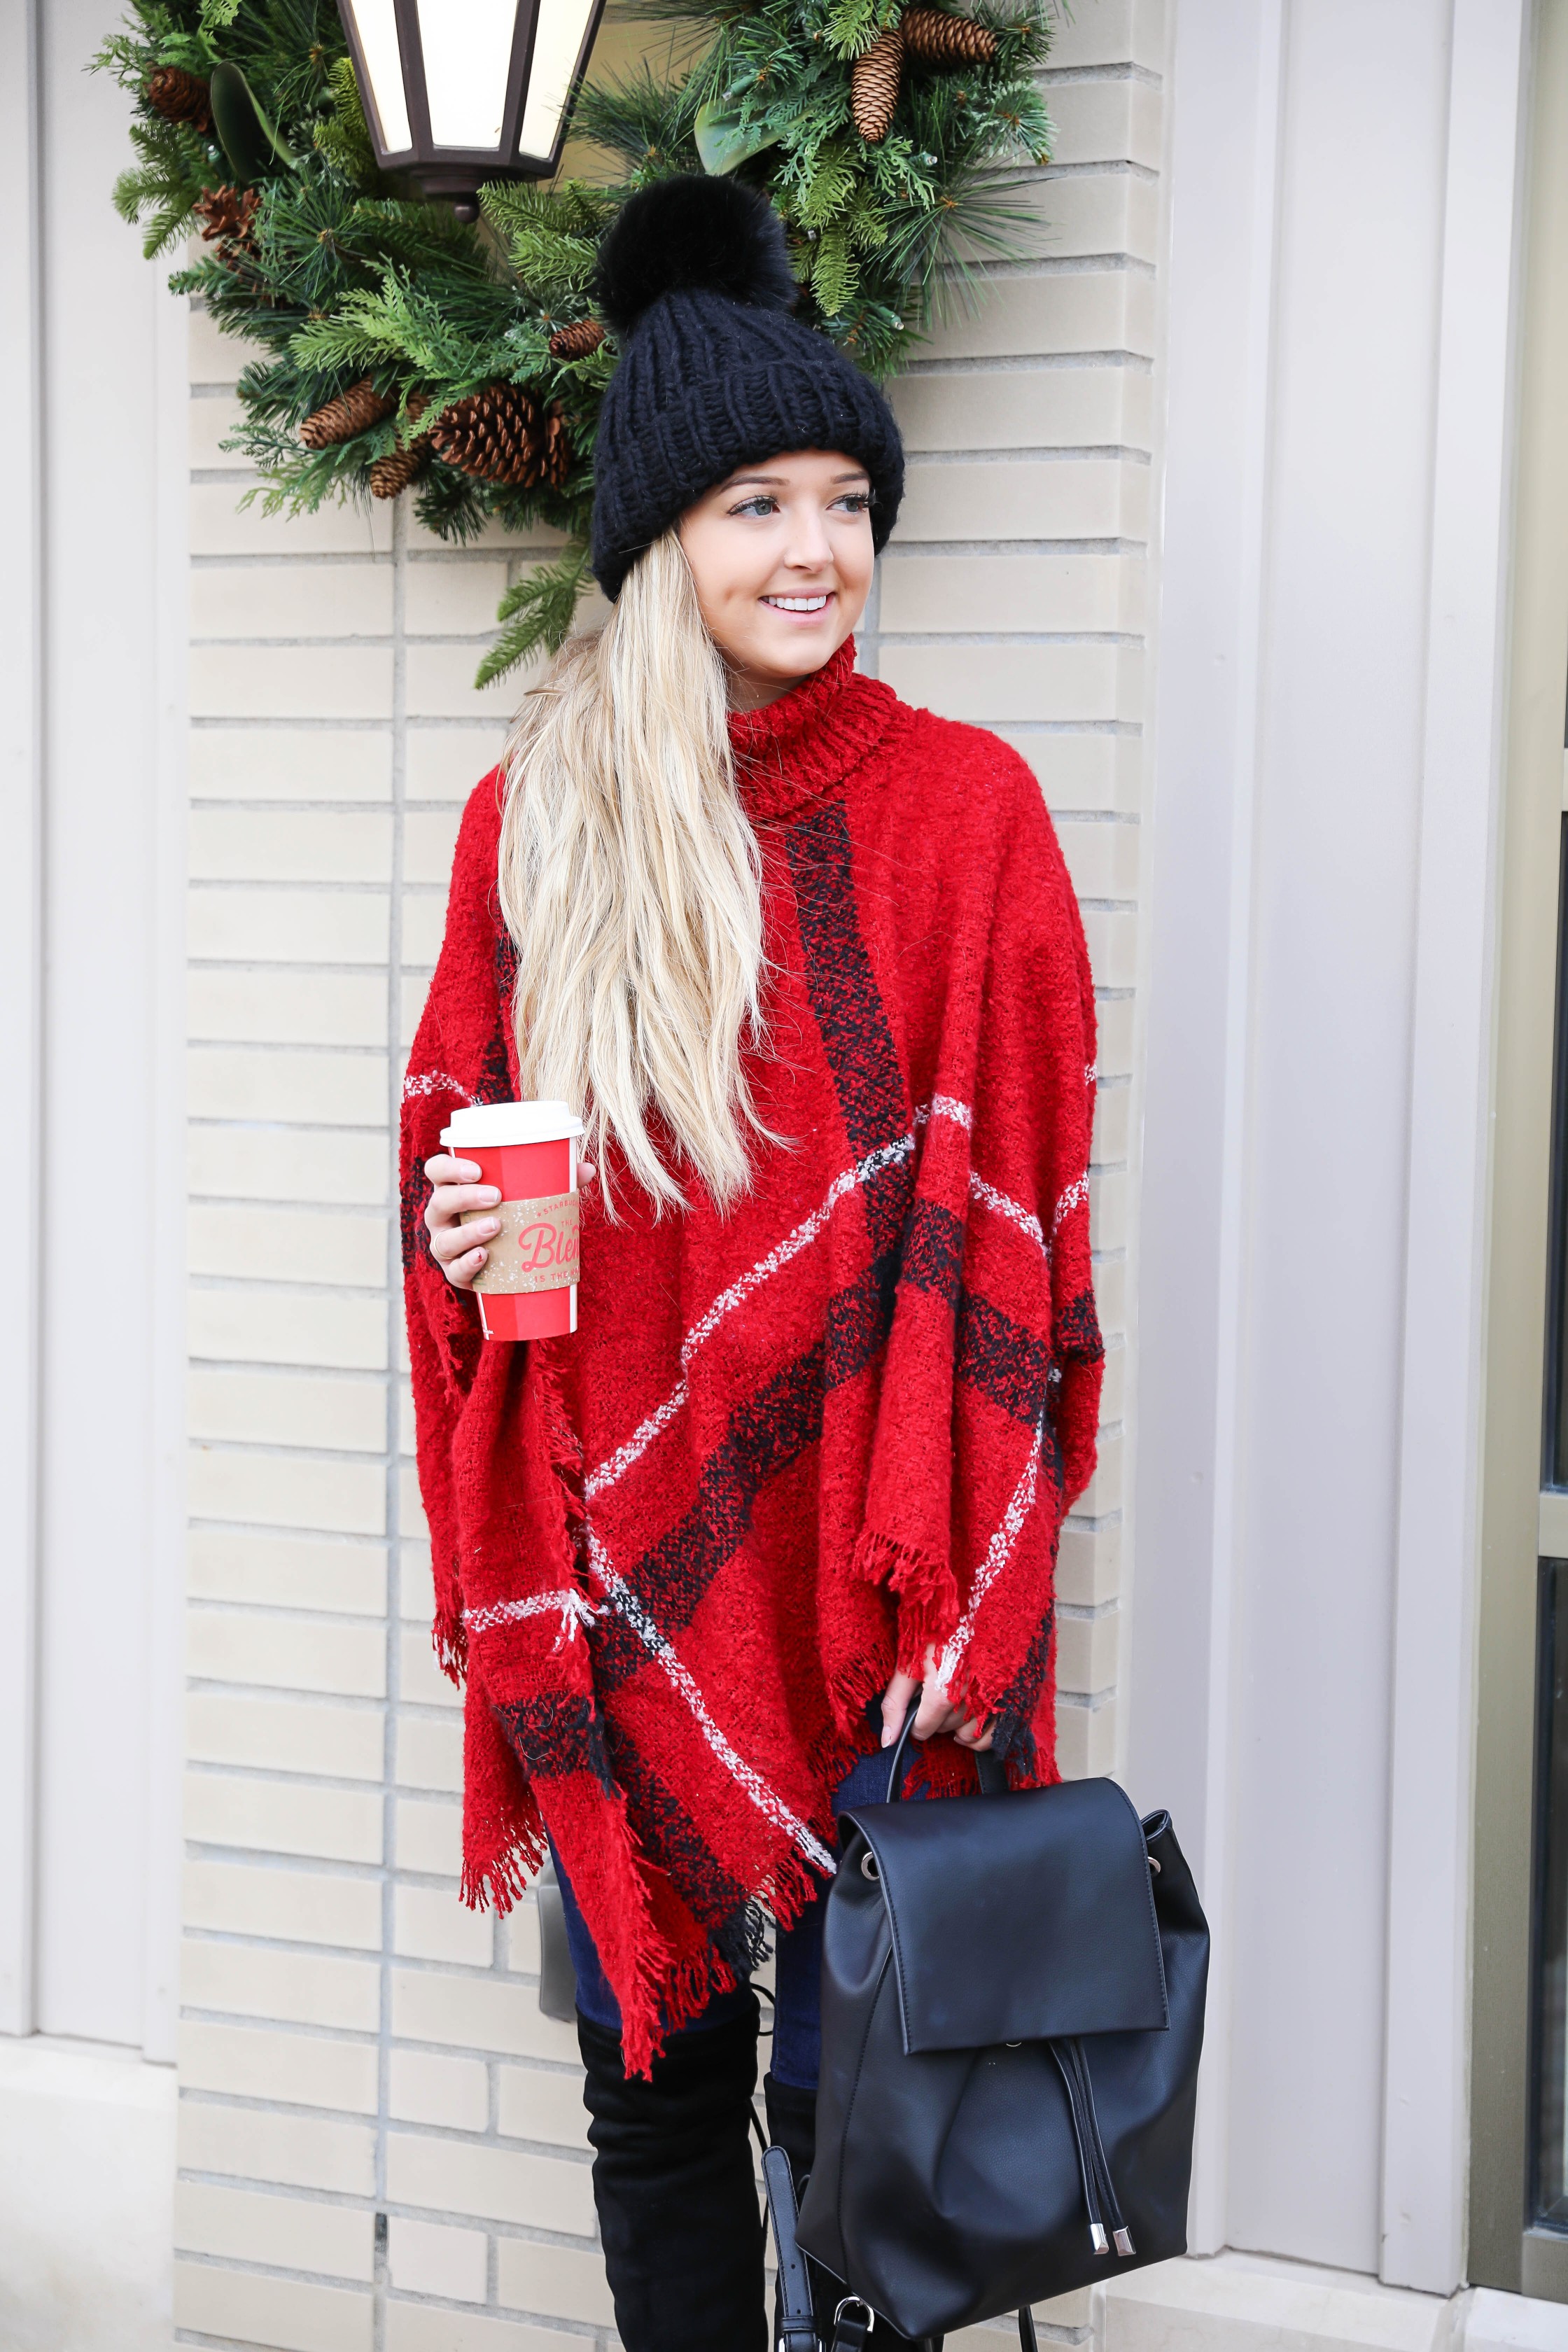 Red plaid Christmas poncho with the cutest turtleneck! I got this cute outfit from the Pink Lily Boutique! I love winter fashion, this holiday outfit would make for a cute Christmas look! Details on the blog daily dose of charm by lauren lindmark